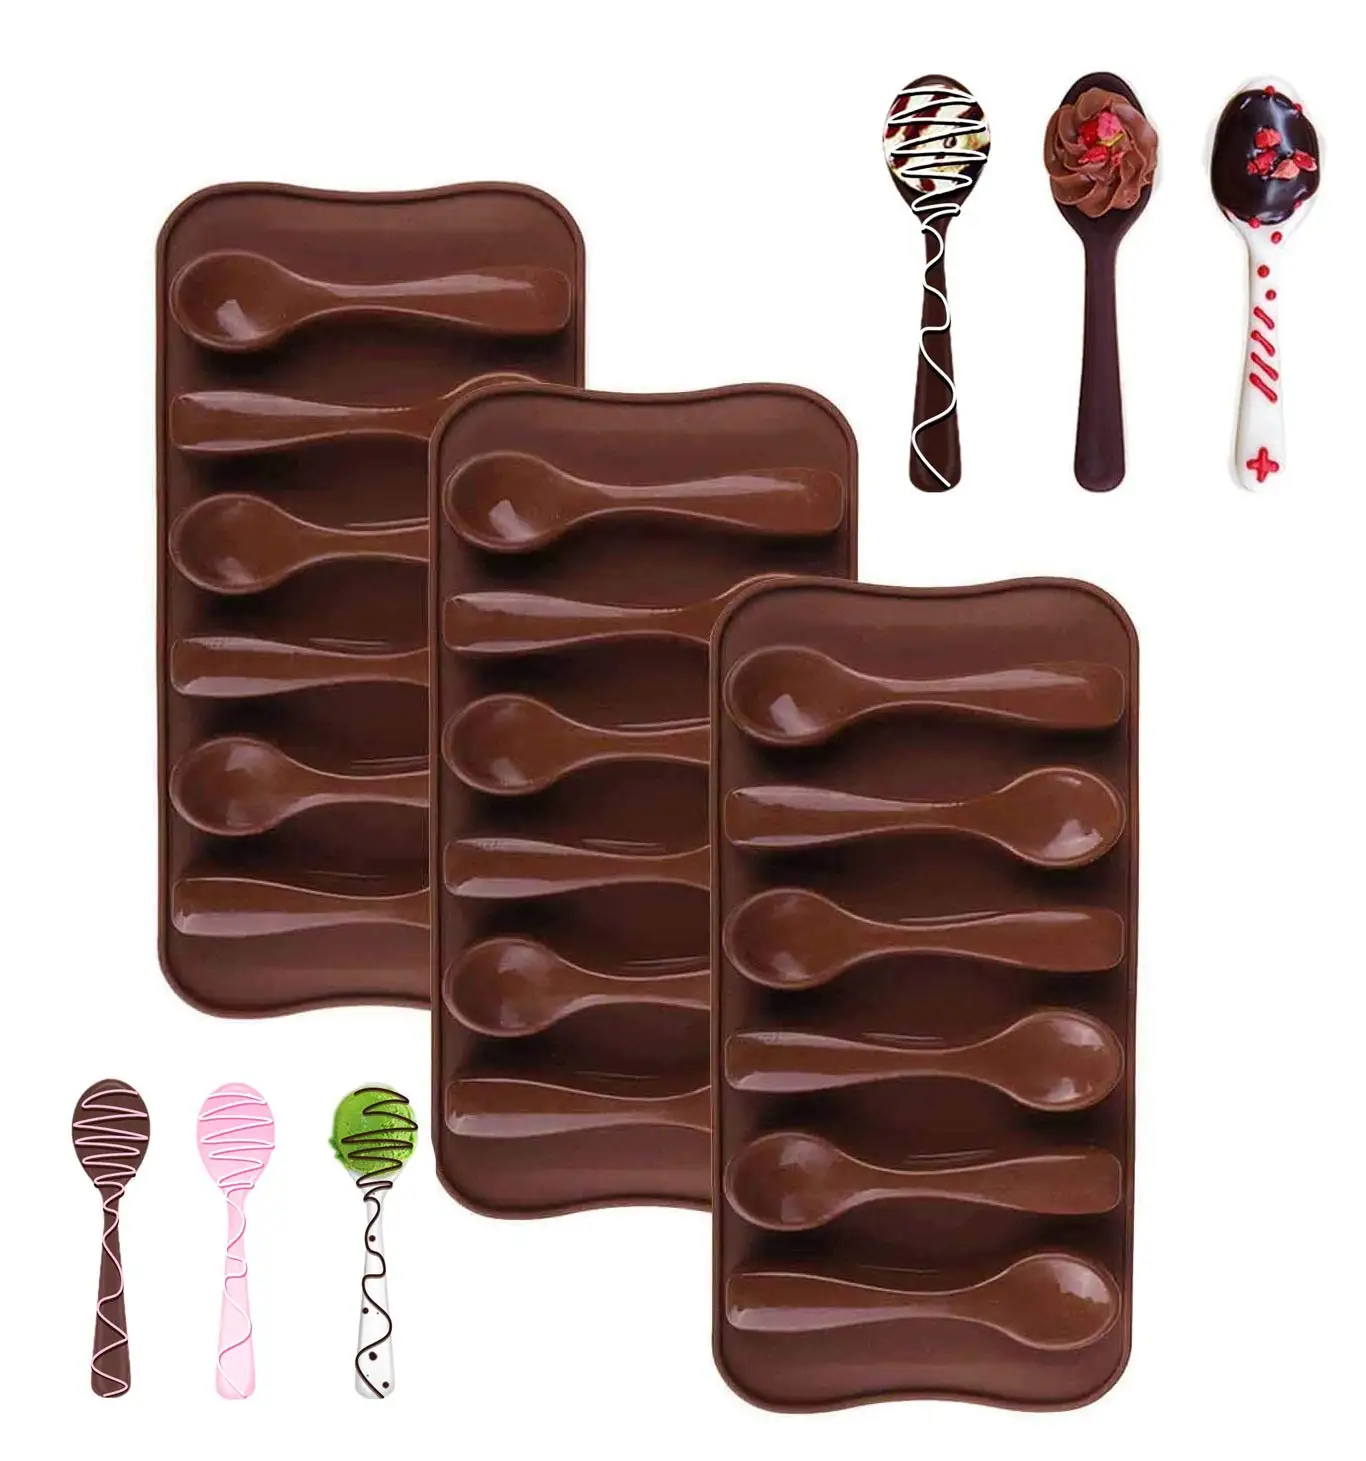 Spoon Shape Molds Chocolate Candy Gummy Molds Food Grade Chocolate Ice Jelly Silicone Mold Homemade Cupcake Candy Bake Ware